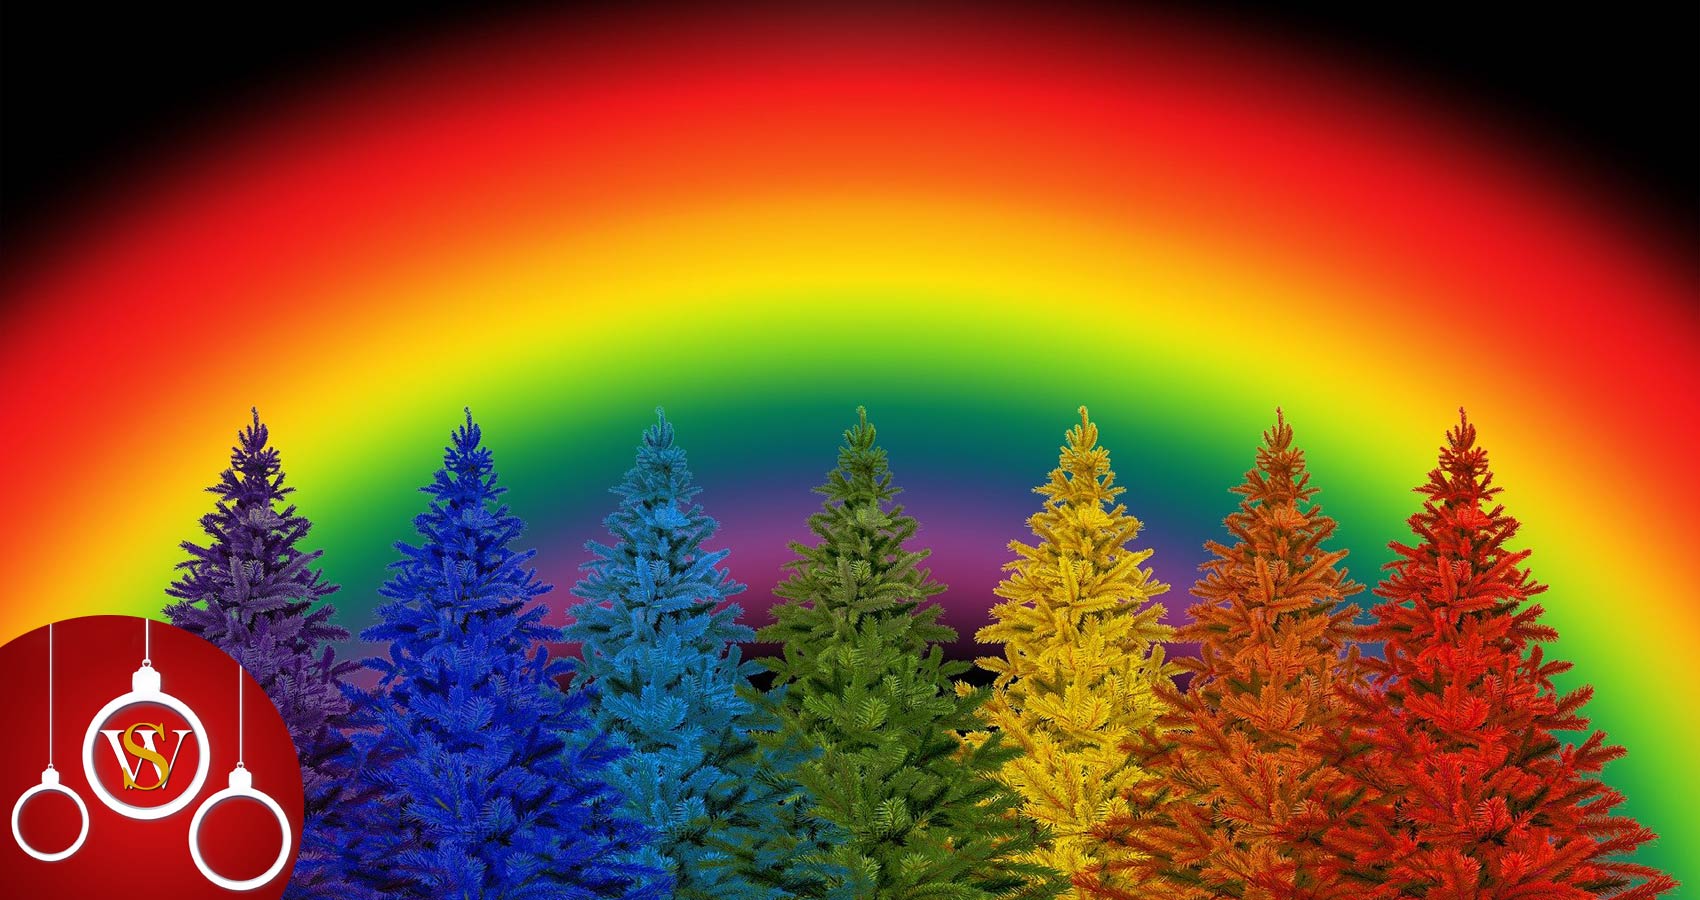 The Christmas Rainbow, poetry by Ken Gosse at Spillwords.com